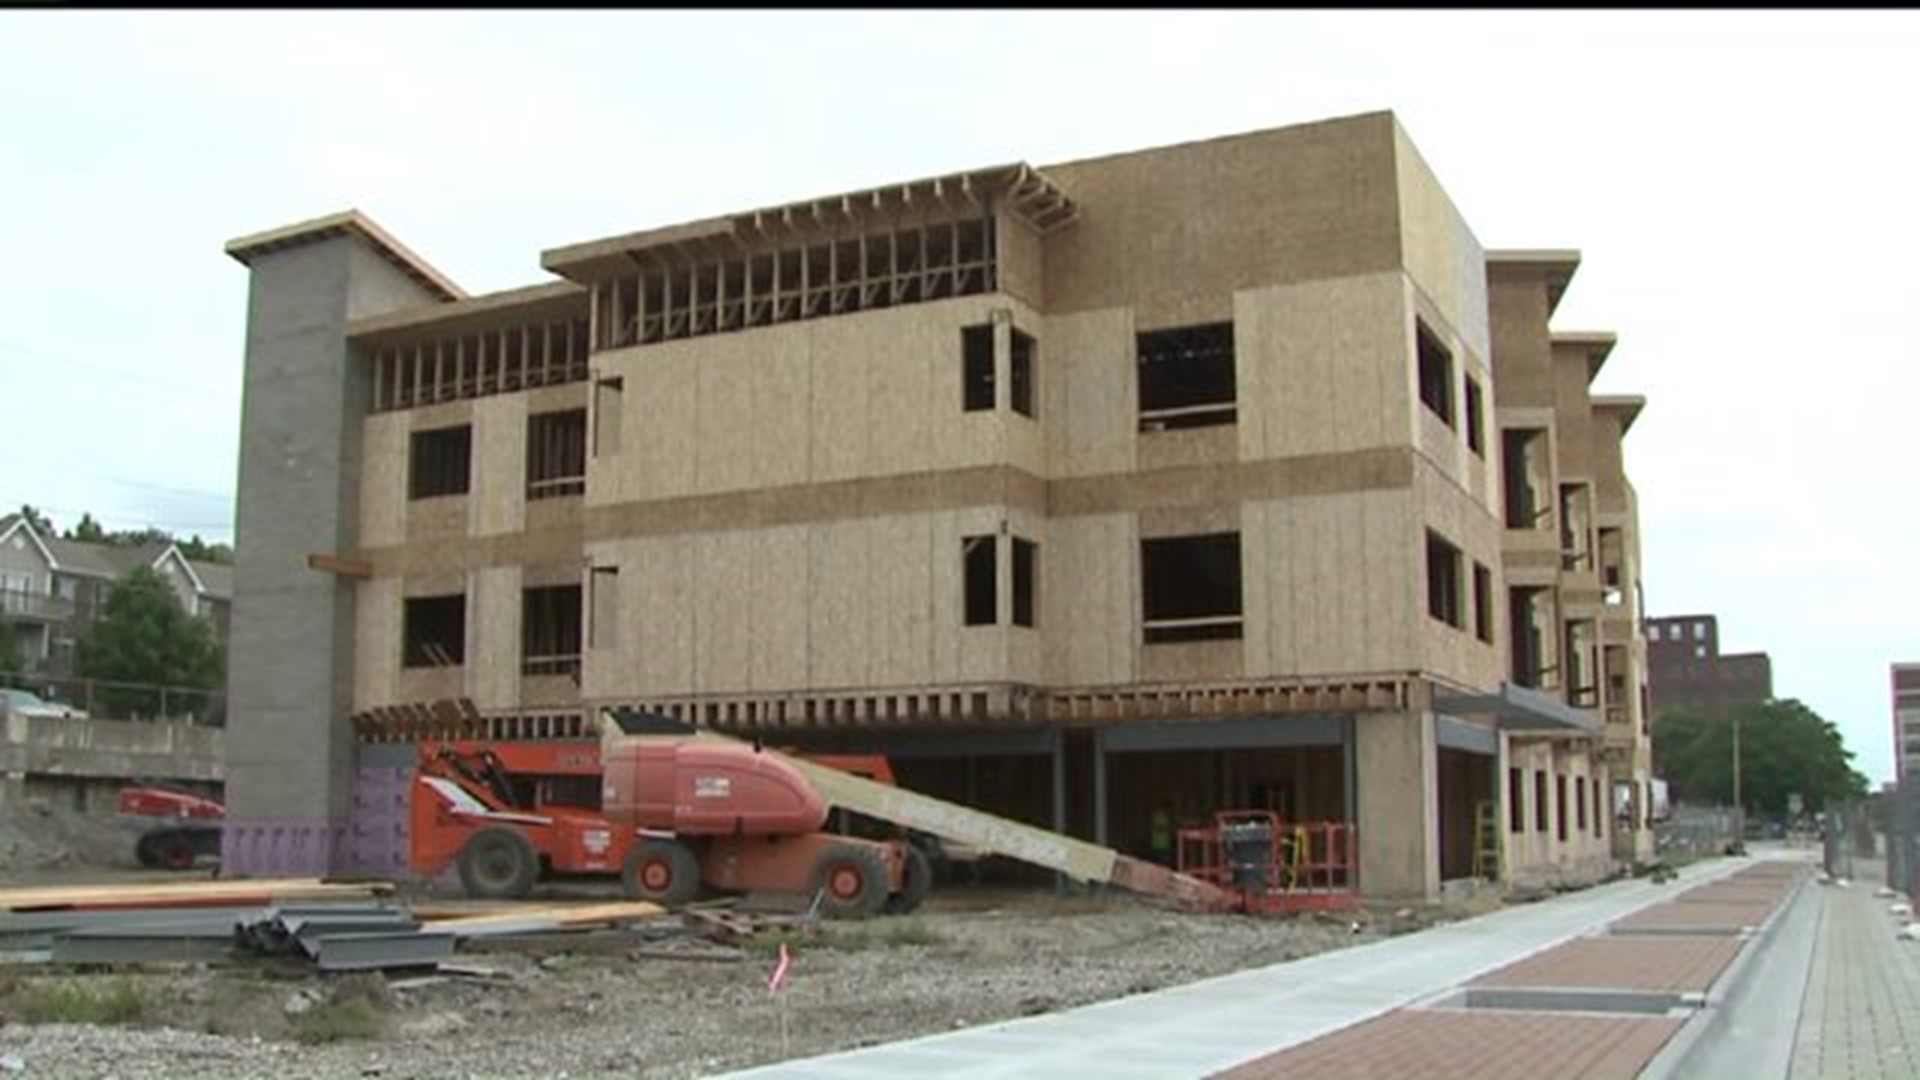 Downtown living options growing in the Quad Cities